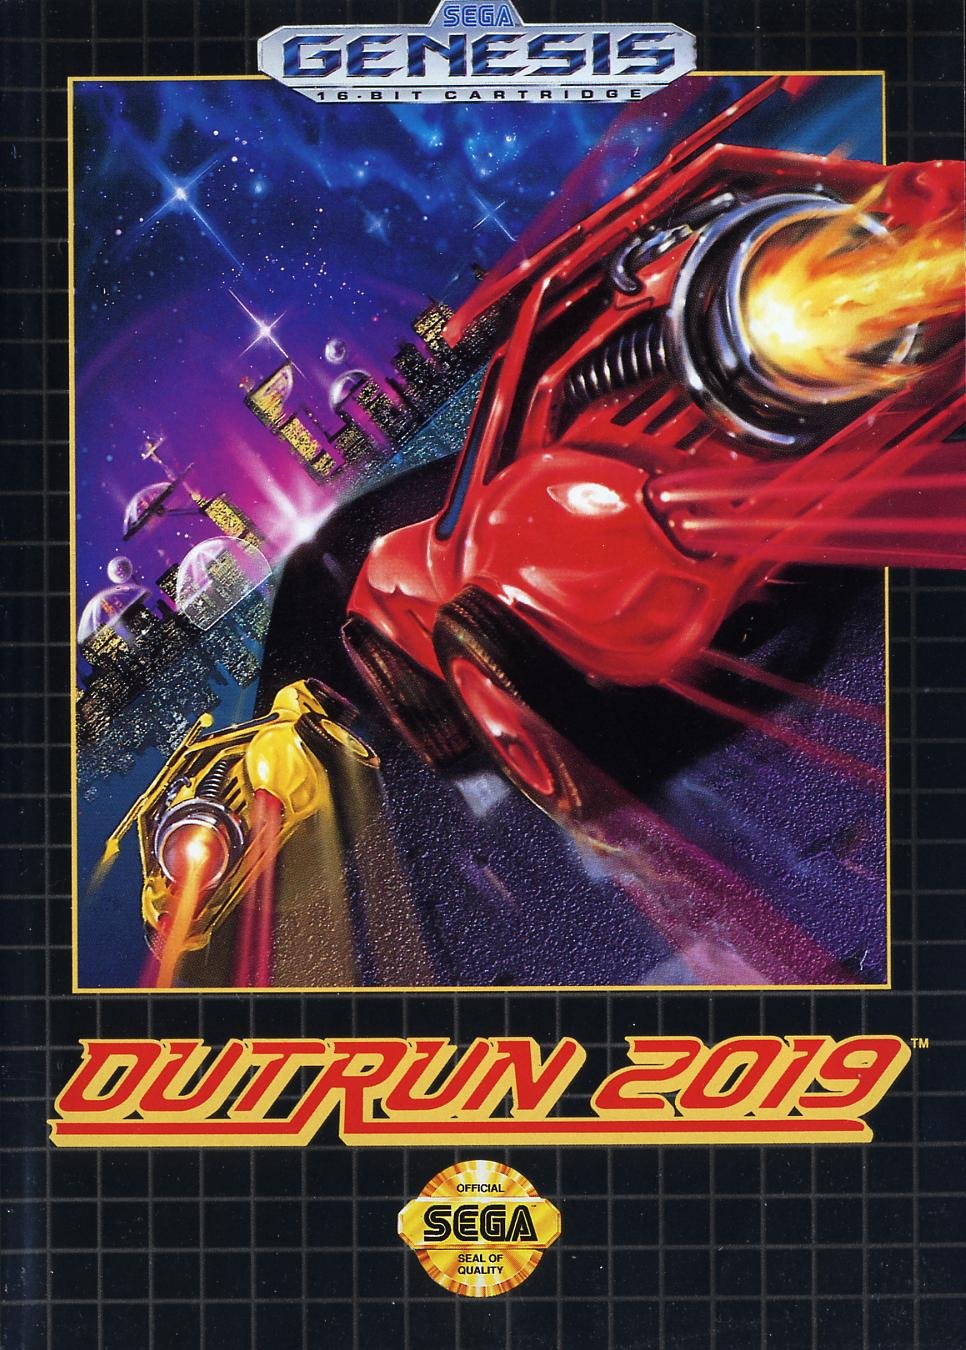 Image of Out Run 2019